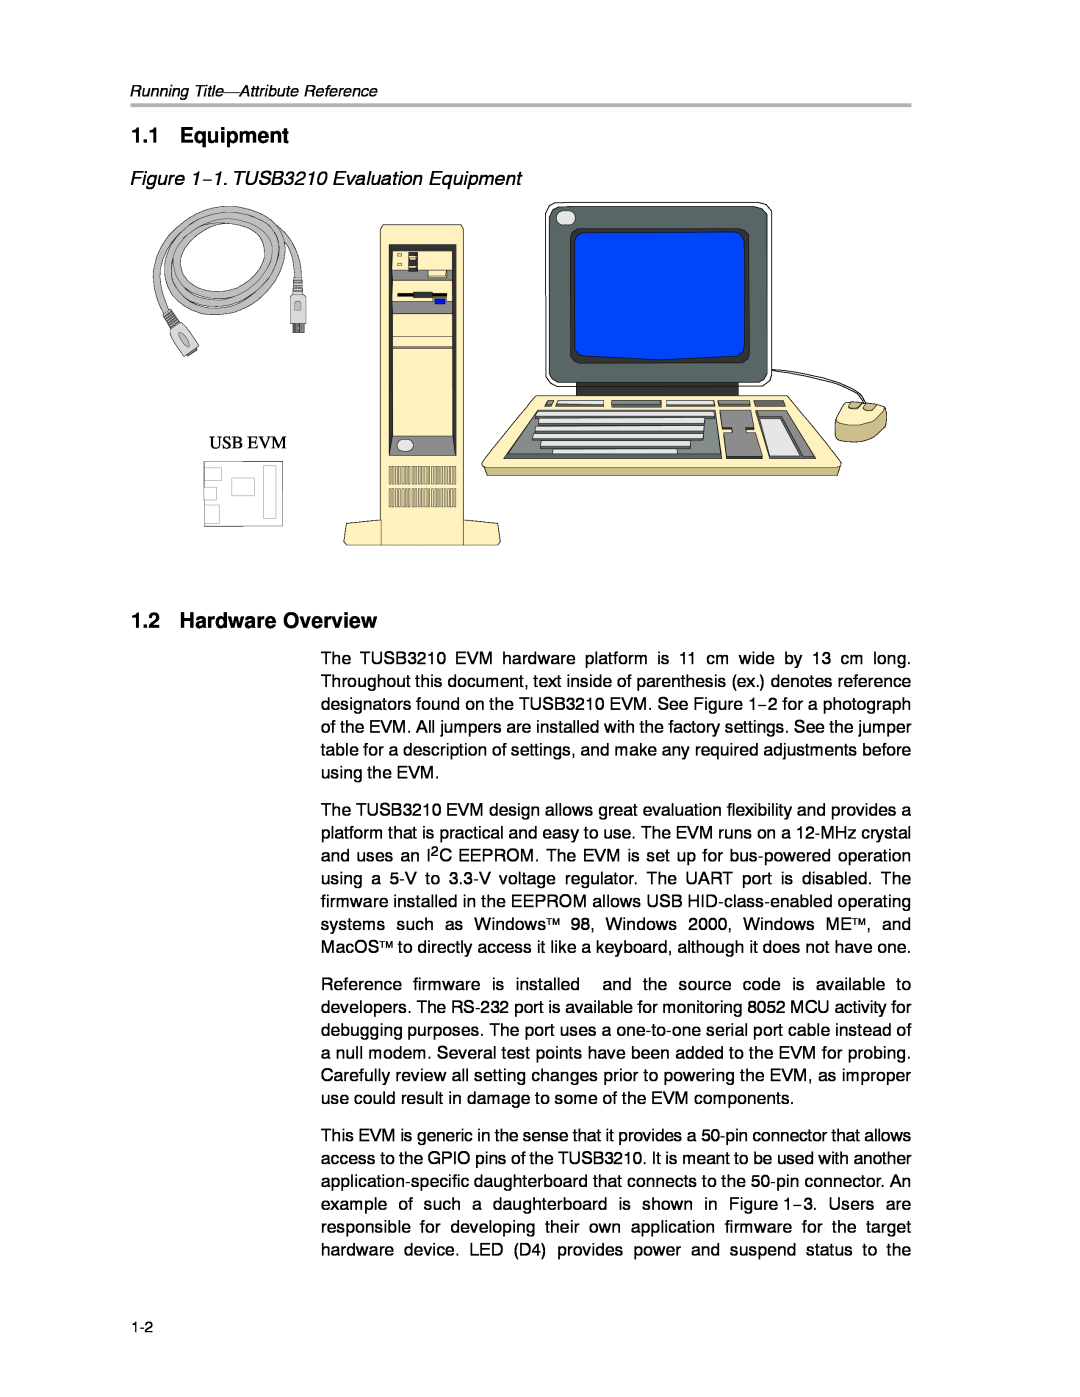 Texas Instruments manual Hardware Overview, 1. TUSB3210 Evaluation Equipment 